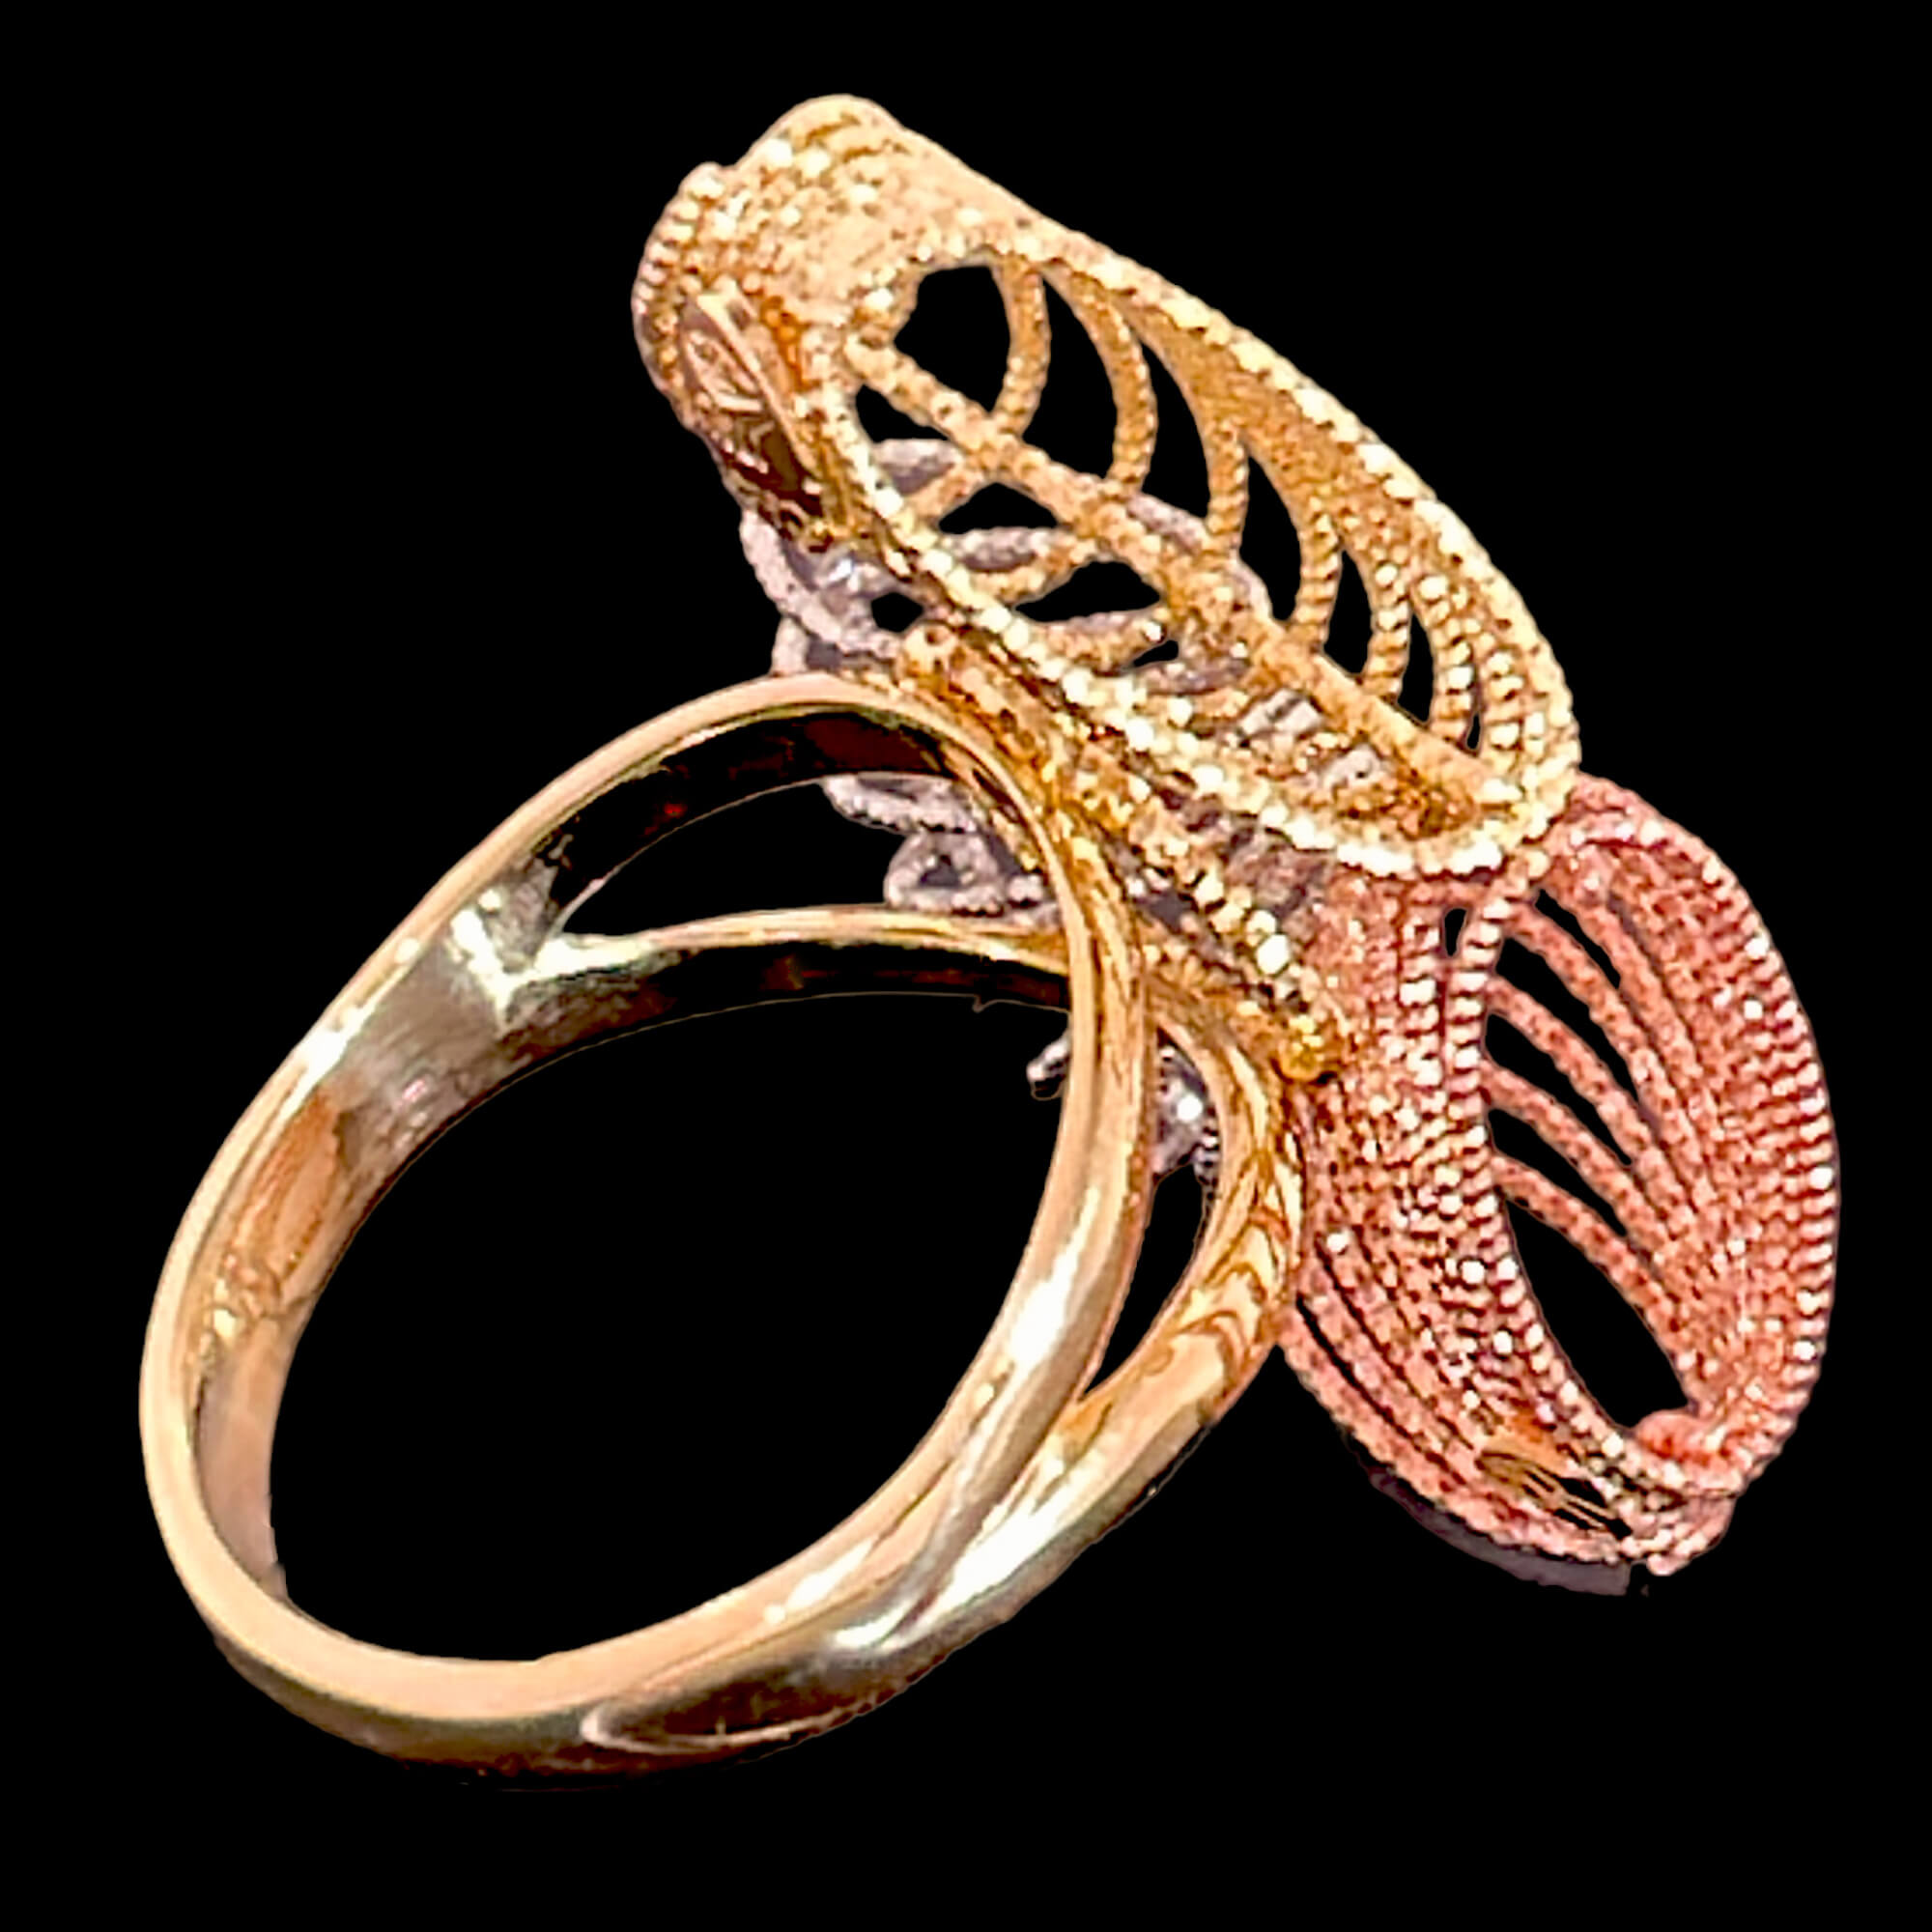 Worked three-color ring made of 18kt gold